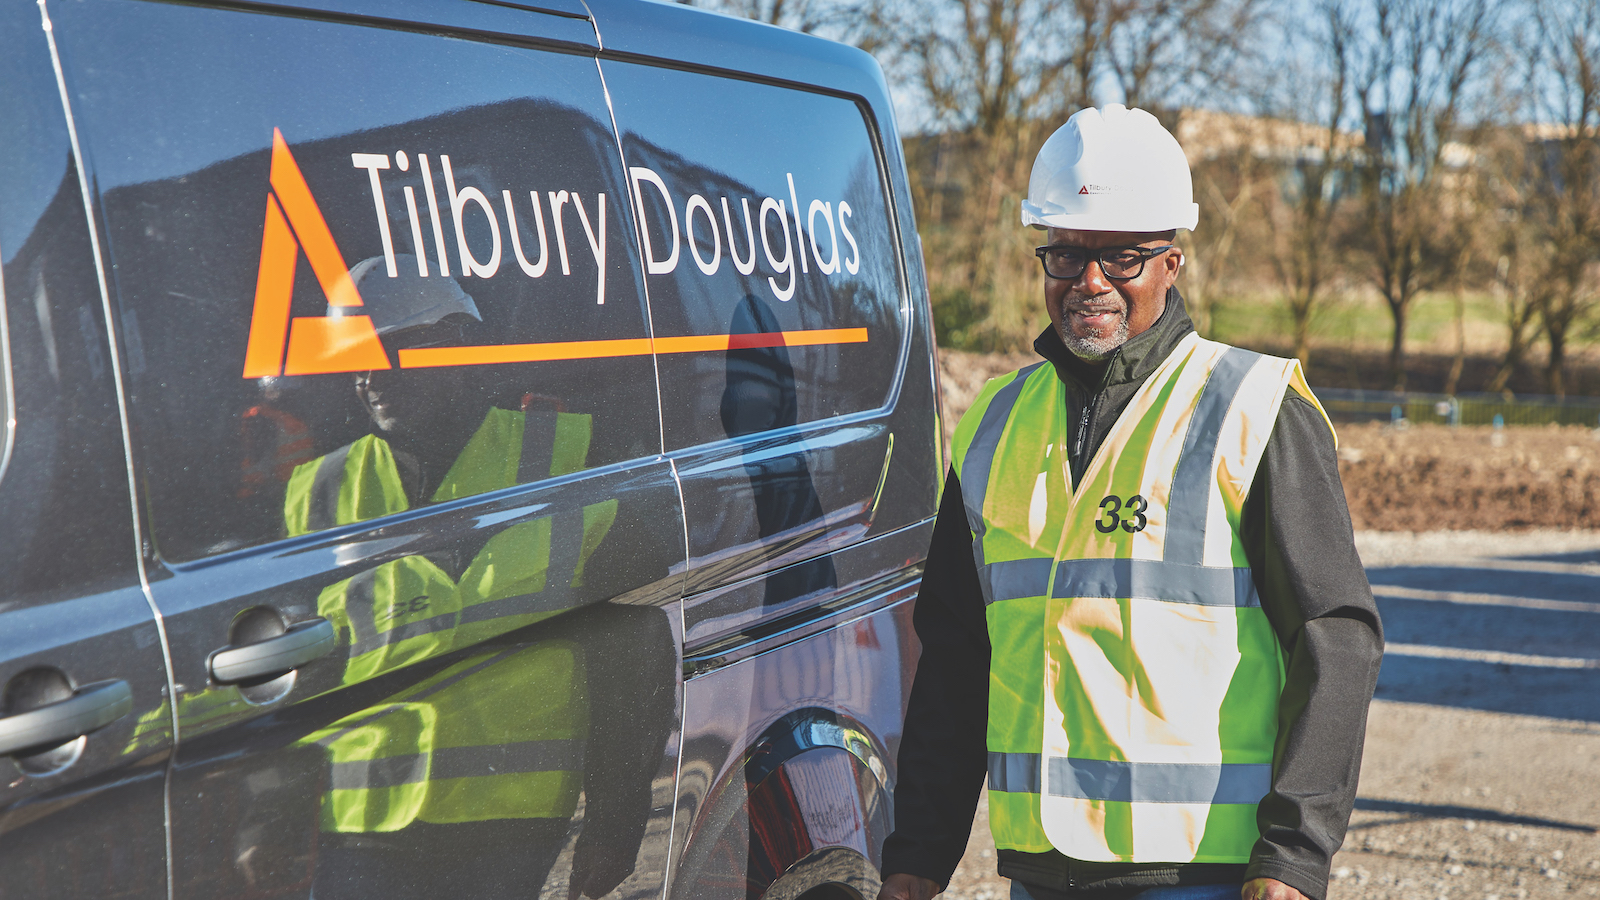 Group fleet director Cliff Lewis shows off a newly branded Tilbury Douglas van, after Interserve Construction took the name of the business back to its roots